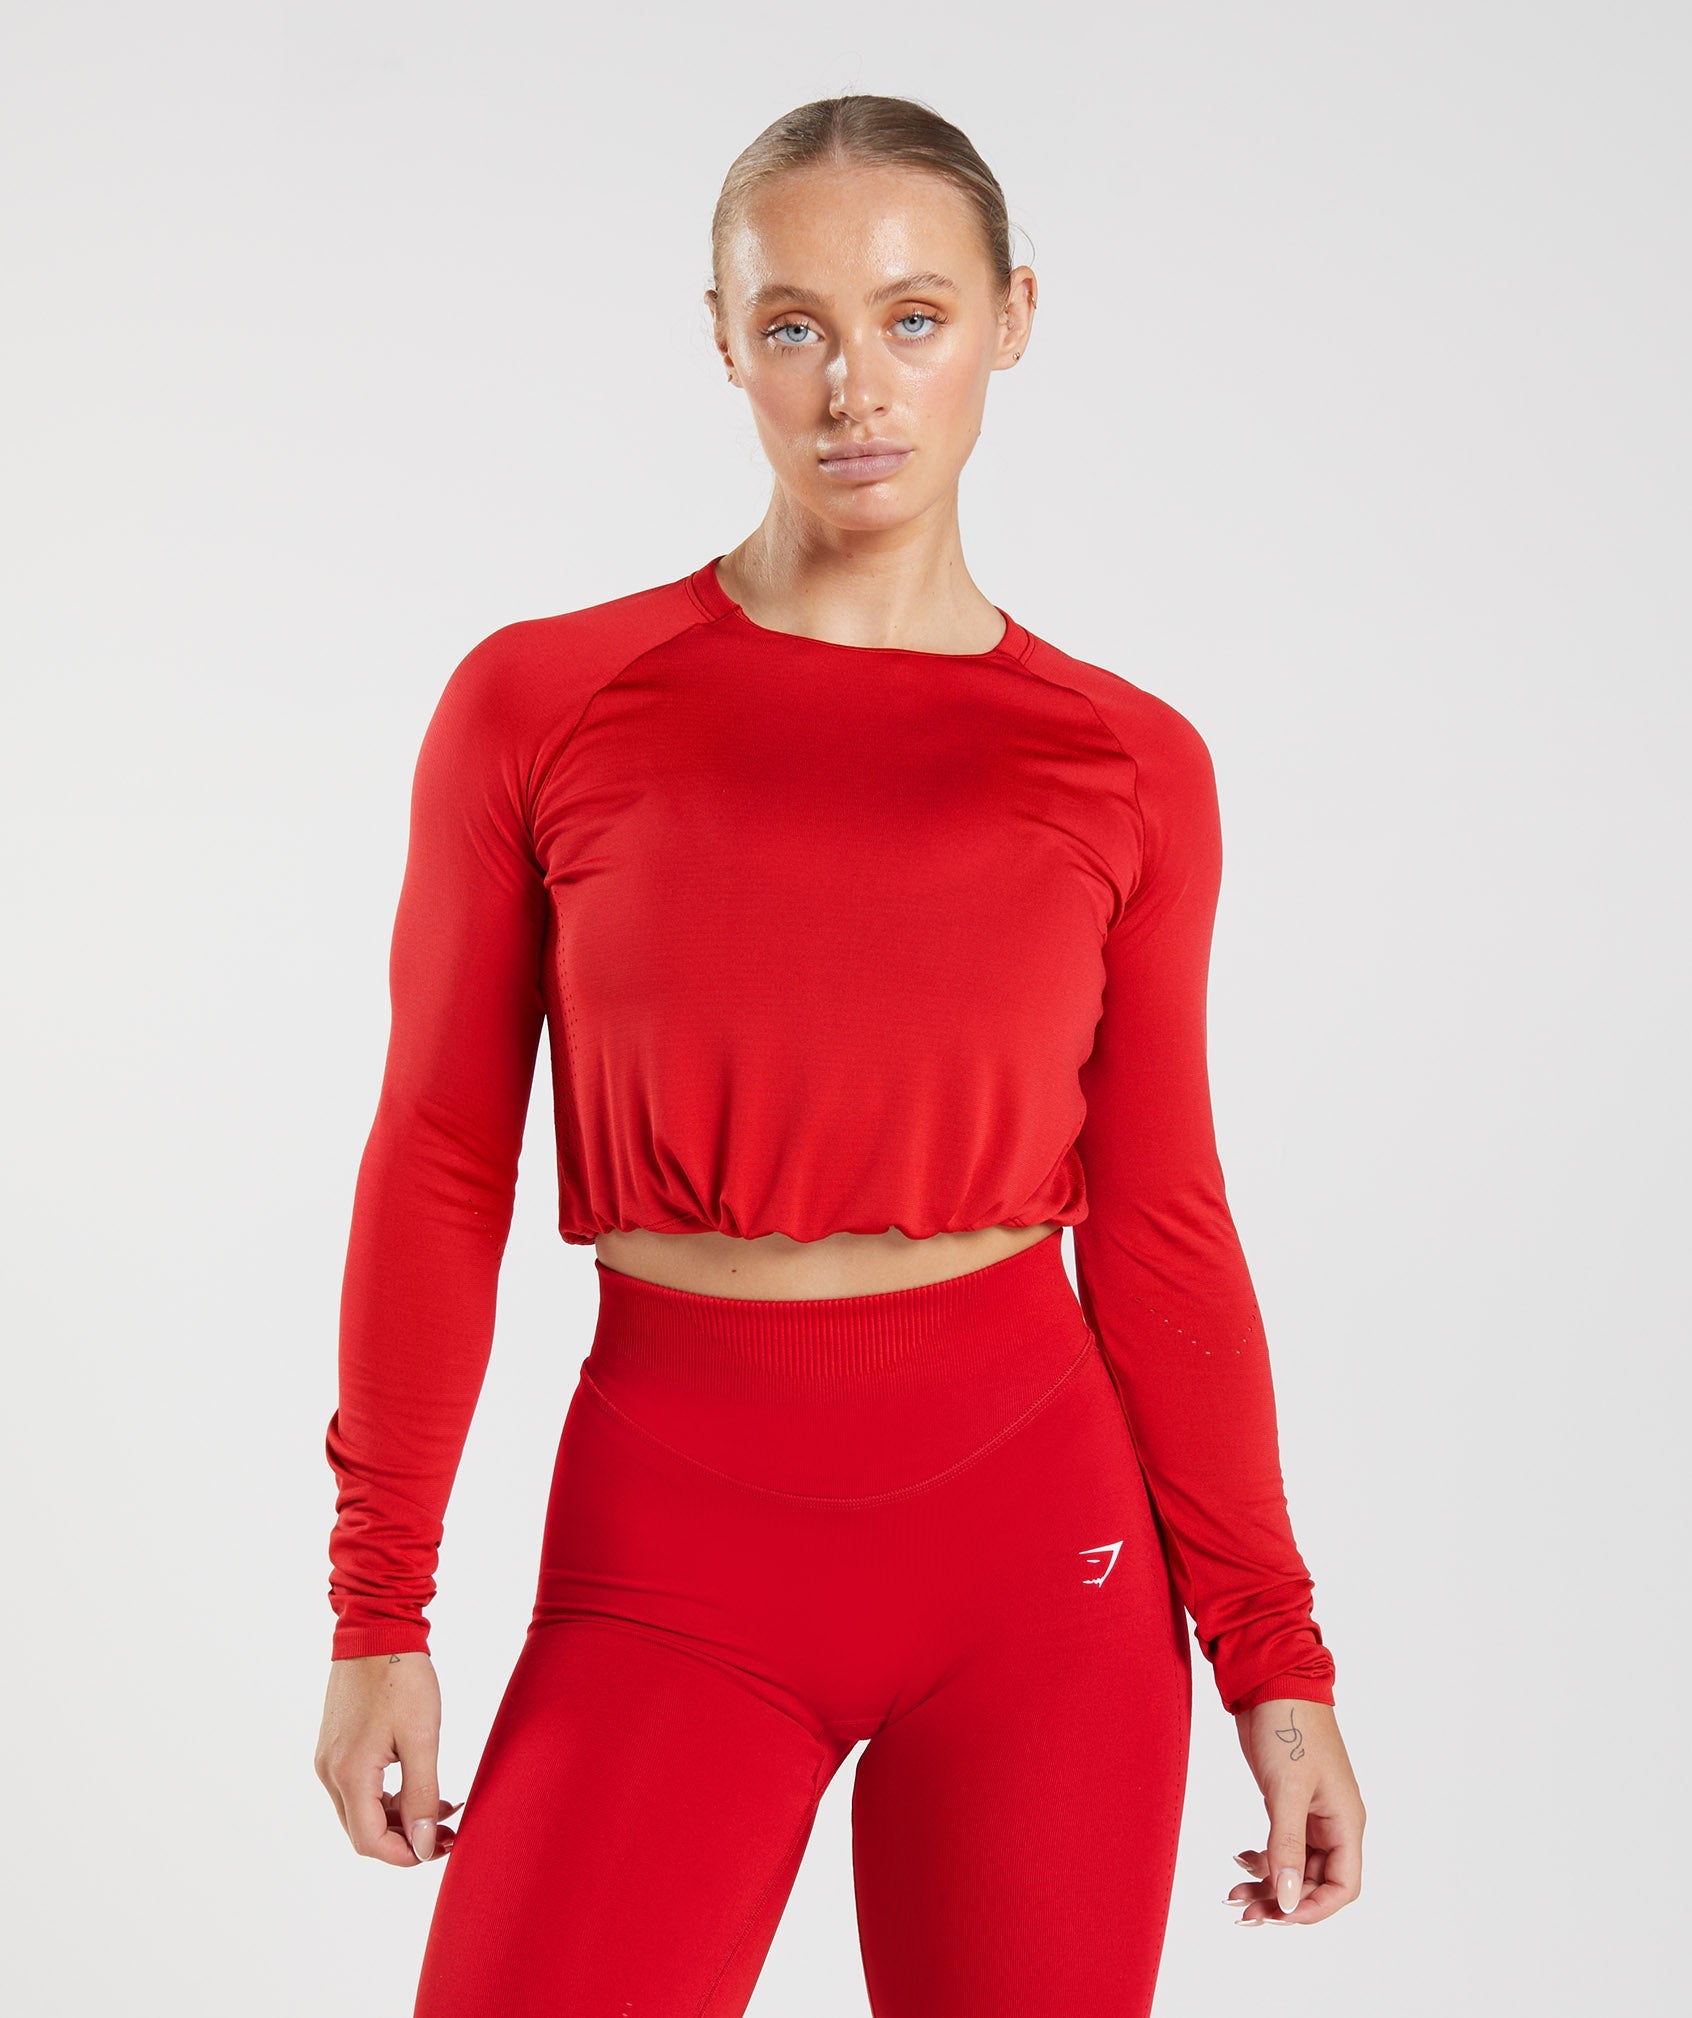 Women's Crop Tops Workout Athletic Shirts 05  Long sleeve workout shirt,  Long sleeve workout, Crop tops